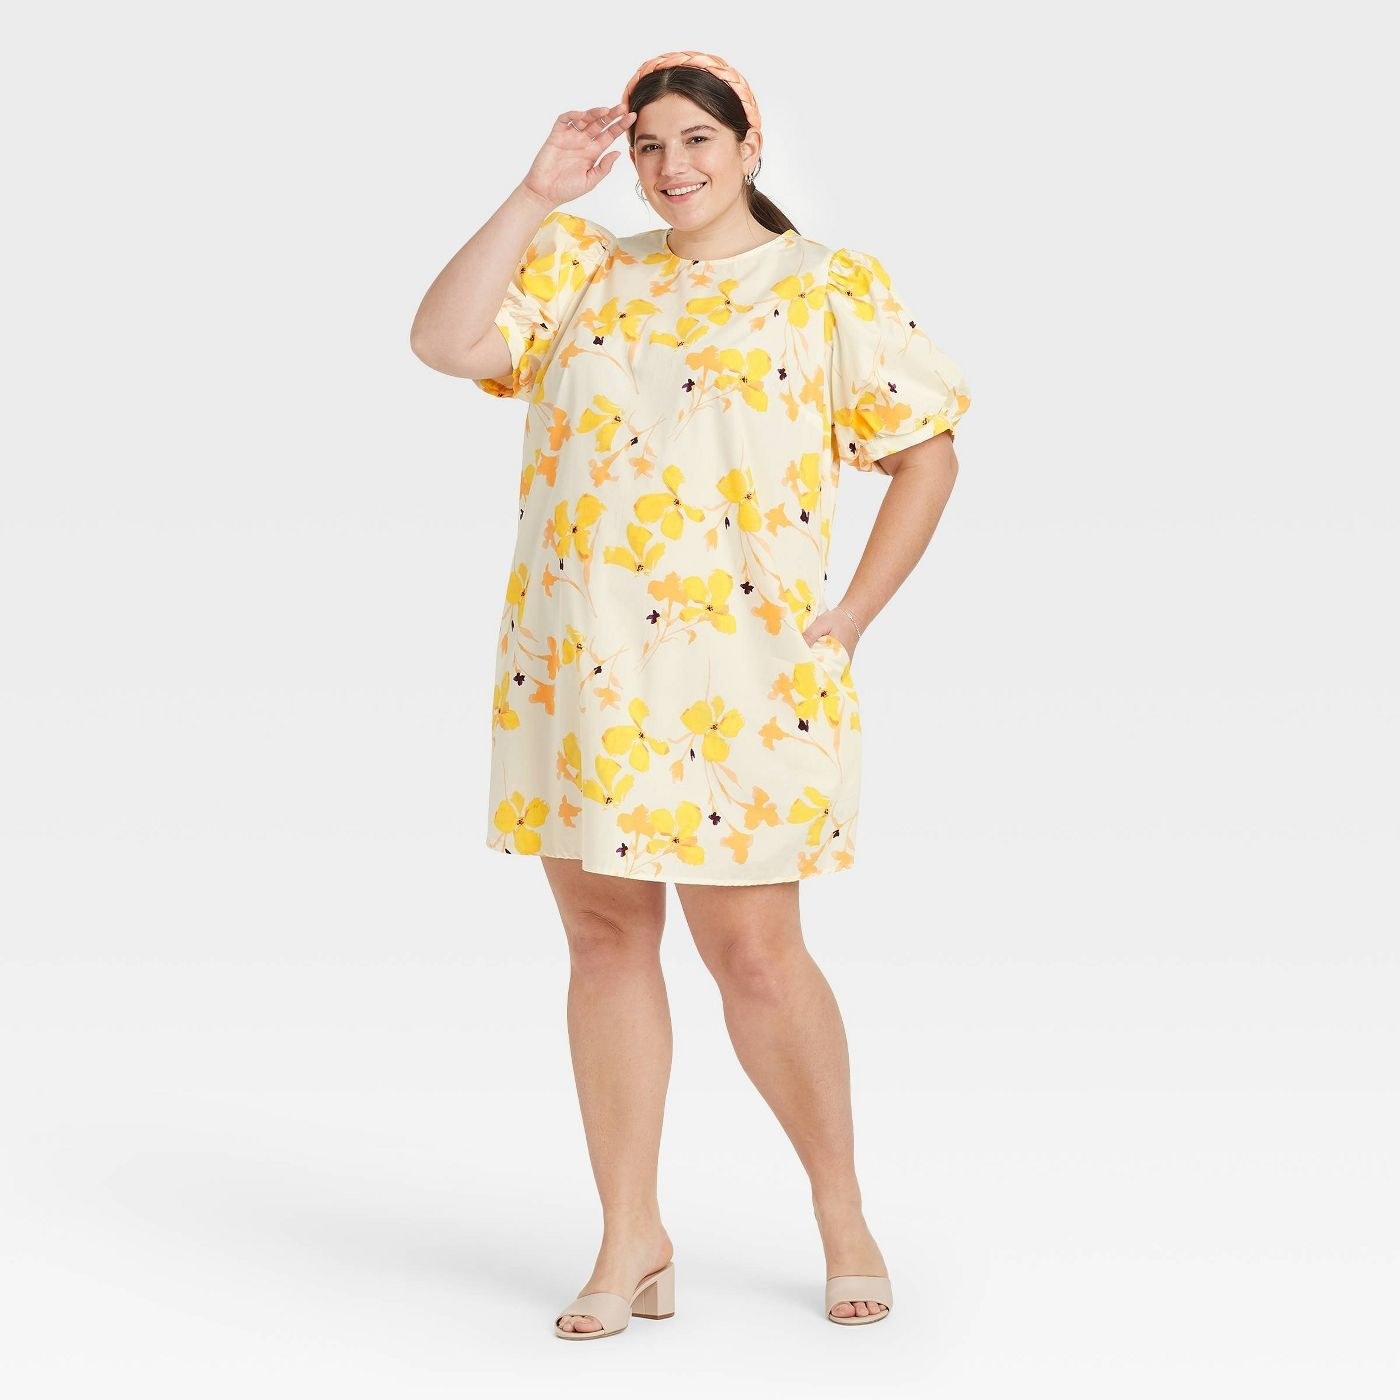 A model wearing a cream and yellow flower print dress with puff sleeves